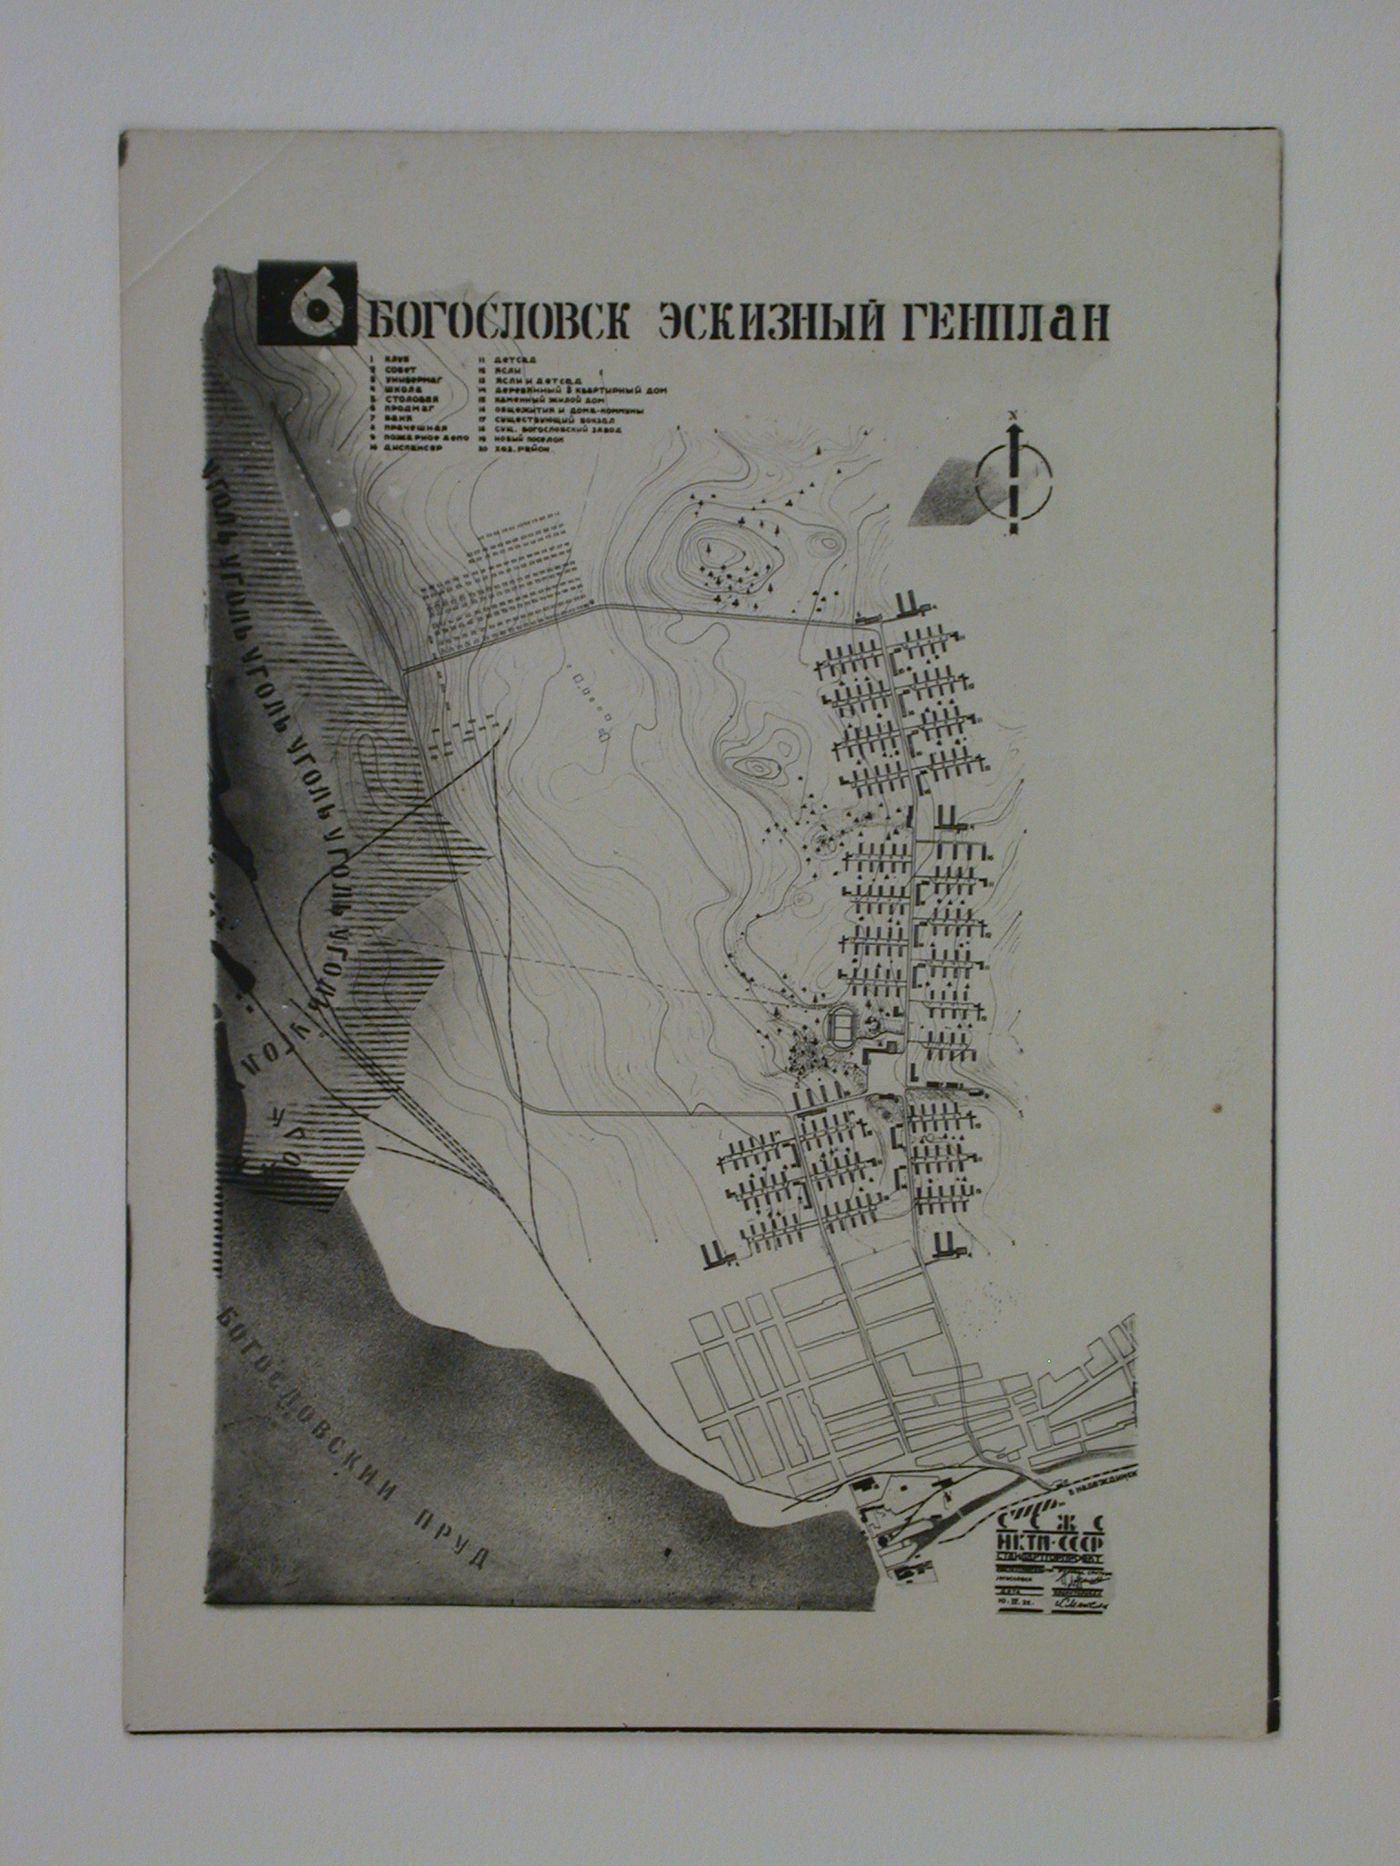 Photograph of a site plan for industrial housing and related services for a coal mining town, Bogoslovsk, Soviet Union (now in Russia)